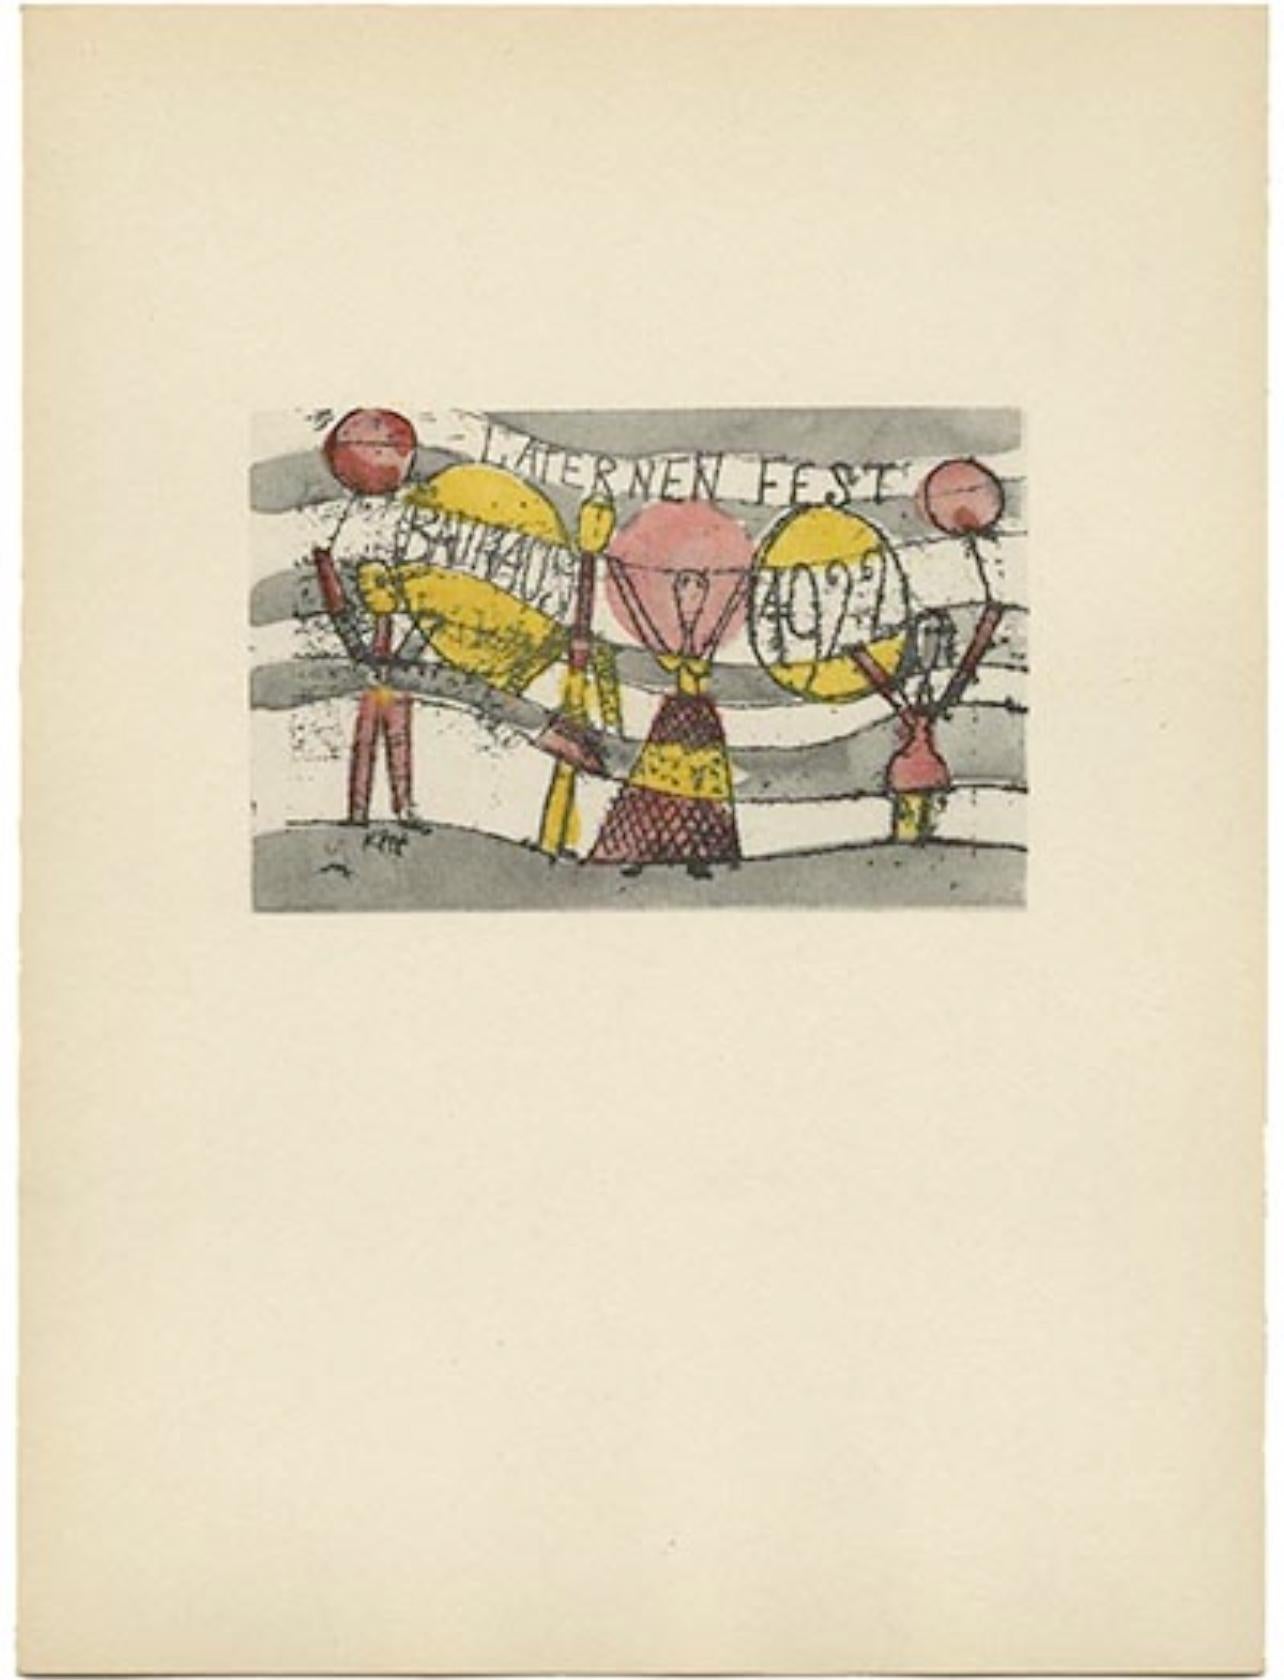 Klee, Postcard for Bauhaus Lantern Party, Prints of Paul Klee (after) For Sale 4